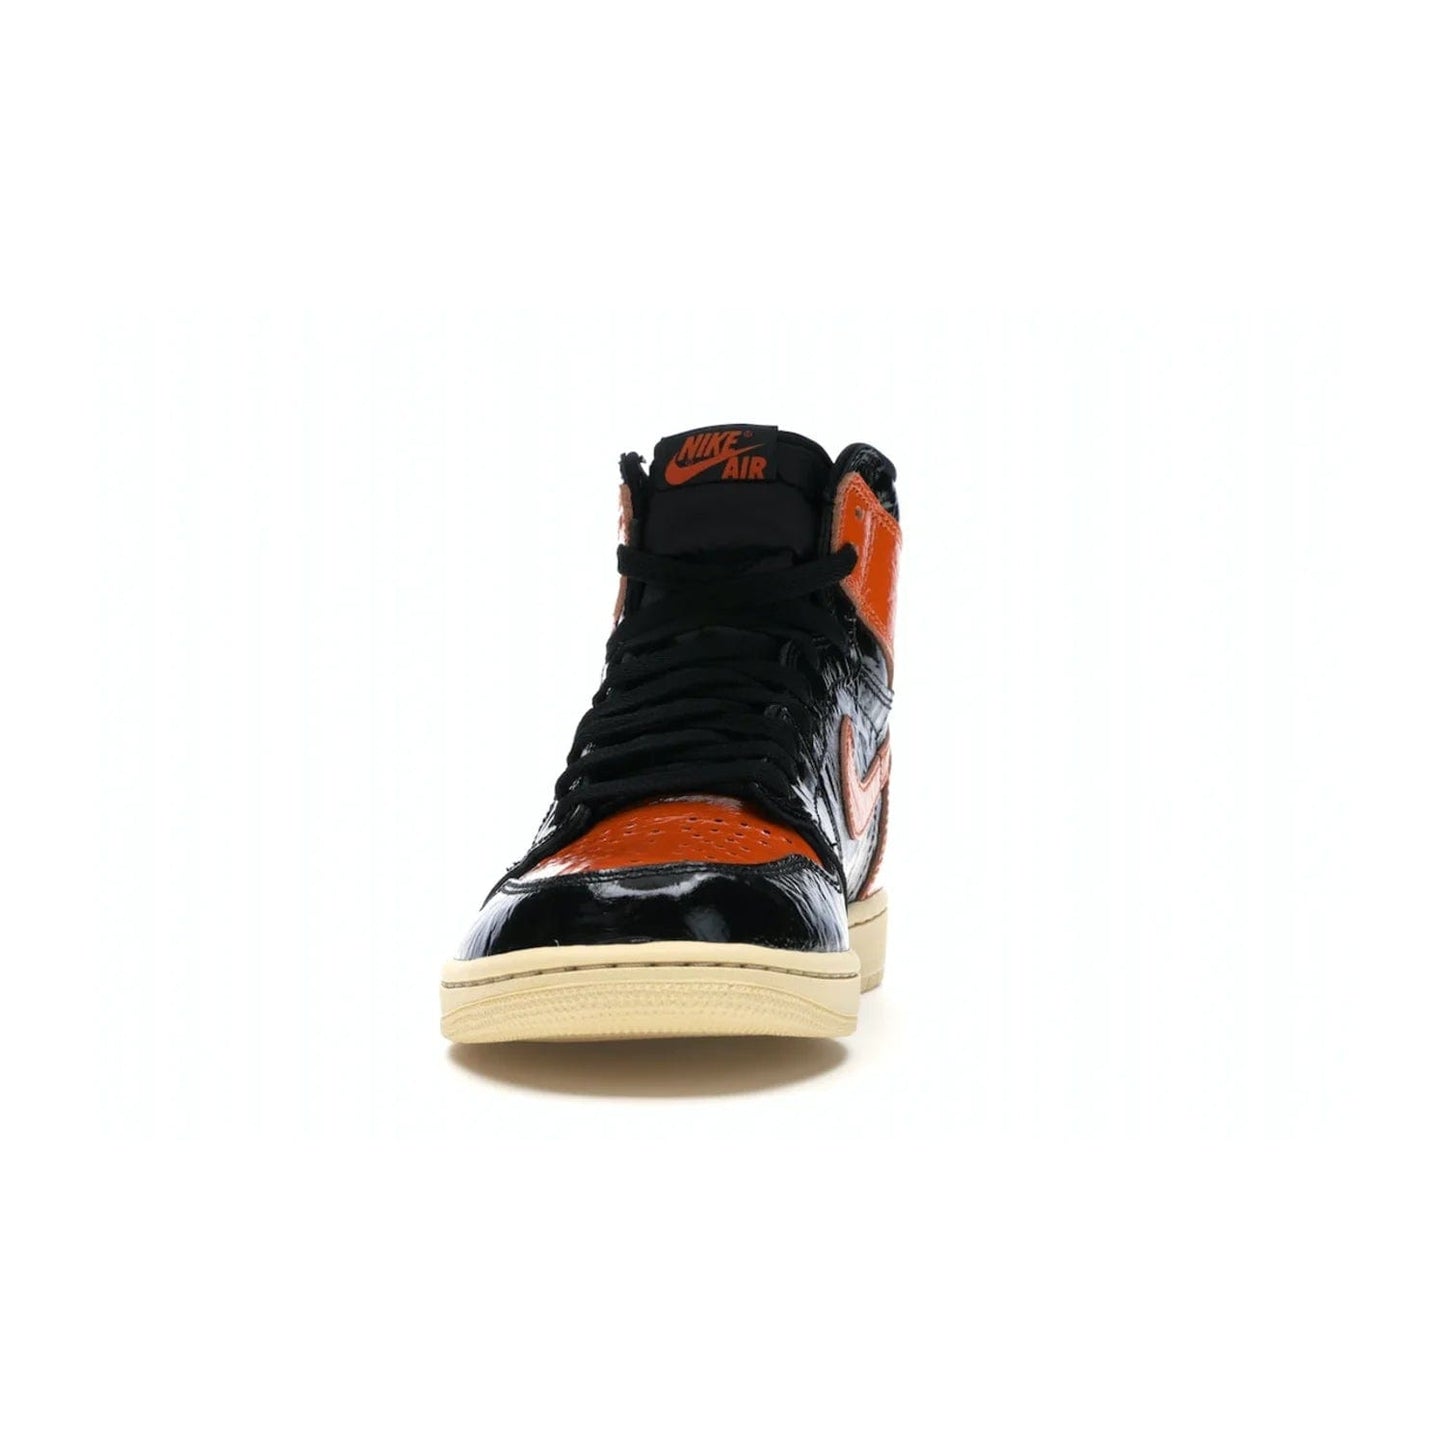 Jordan 1 Retro High Shattered Backboard 3.0 - Image 11 - Only at www.BallersClubKickz.com - #
Jordan 1 Retro High Shattered Backboard 3.0: the perfect blend of modern style and nostalgic flair featuring an orange and black crinkled patent leather upper and yellowed vanilla outsole. Get these exclusive sneakers released in October of 2019!